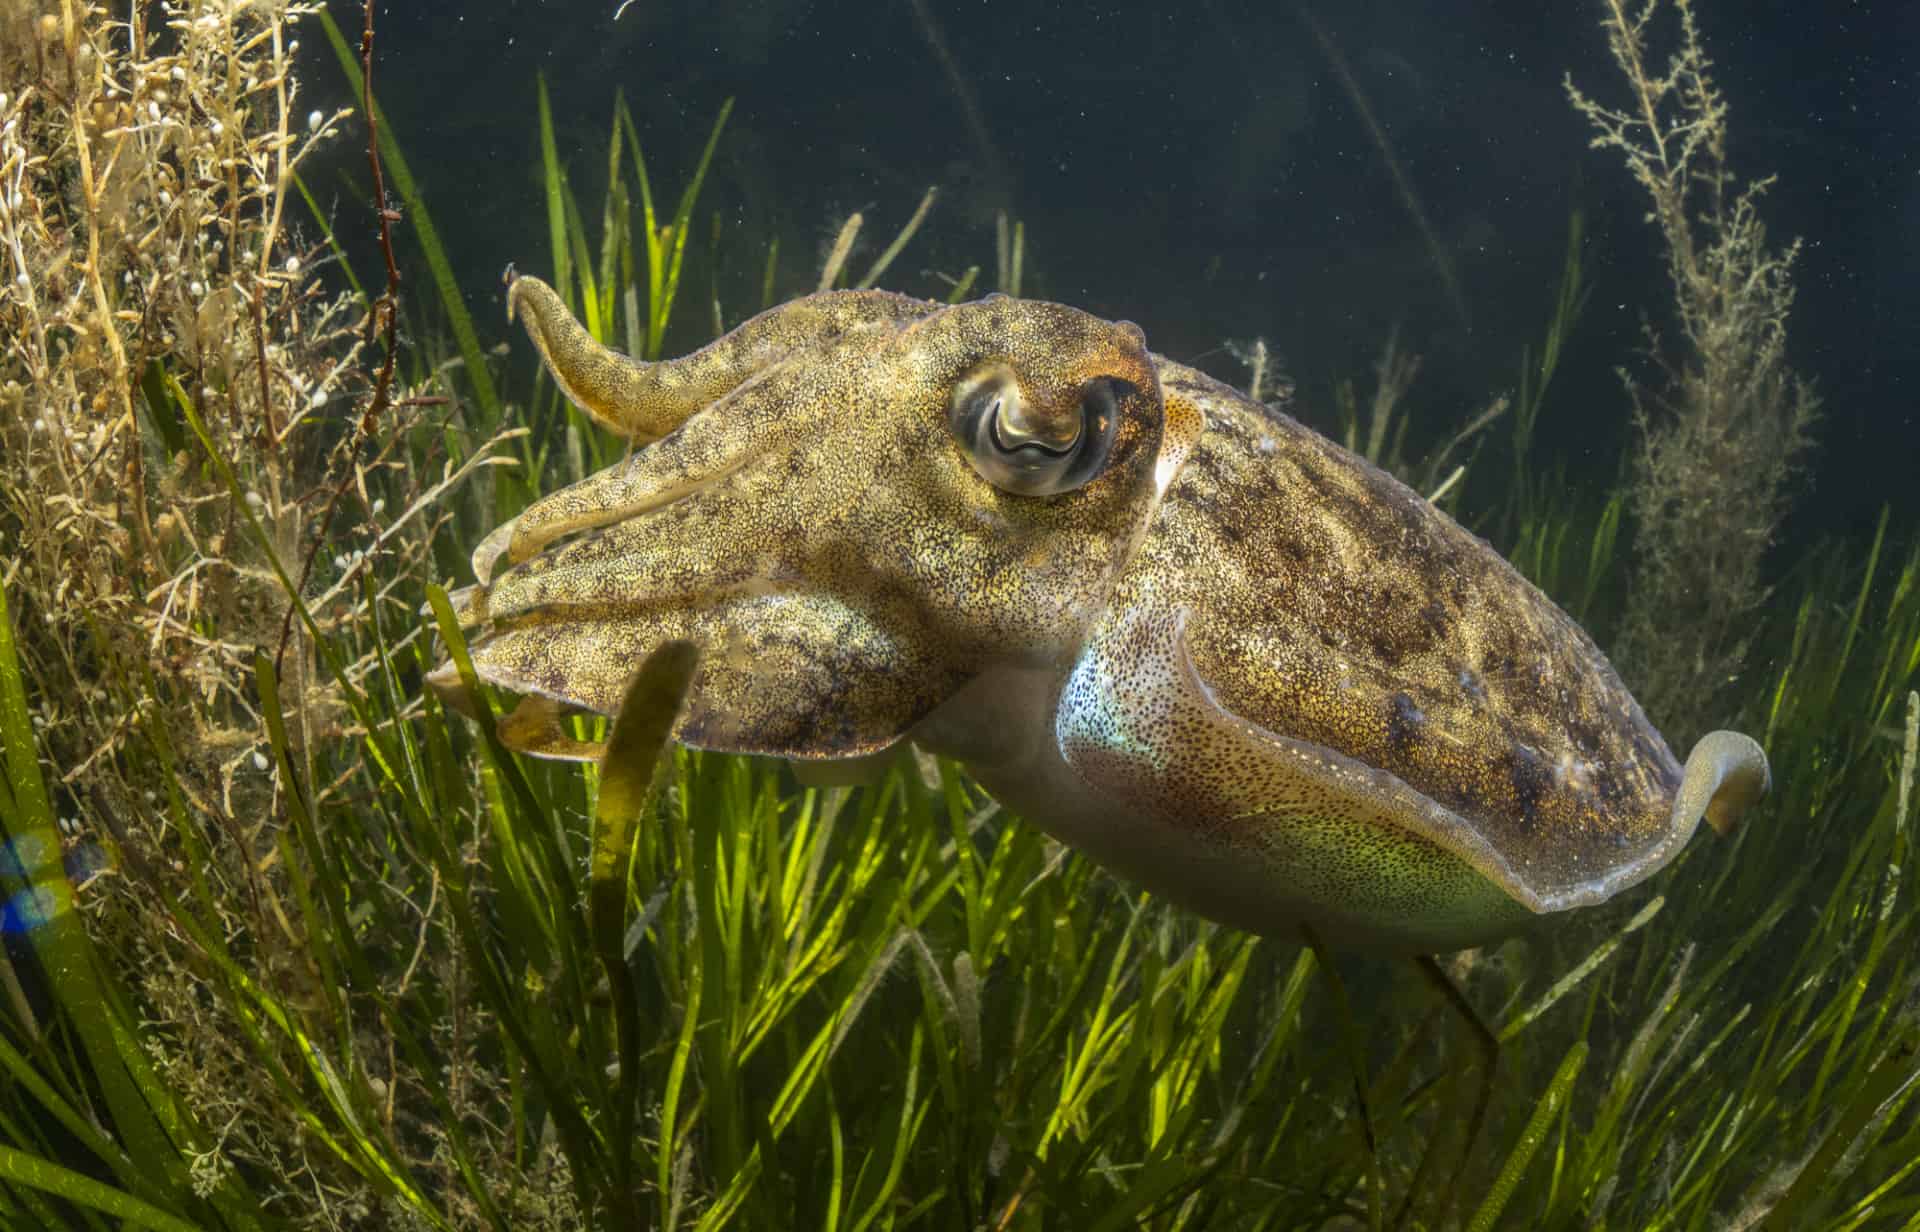 Cuttlefish in seagrass